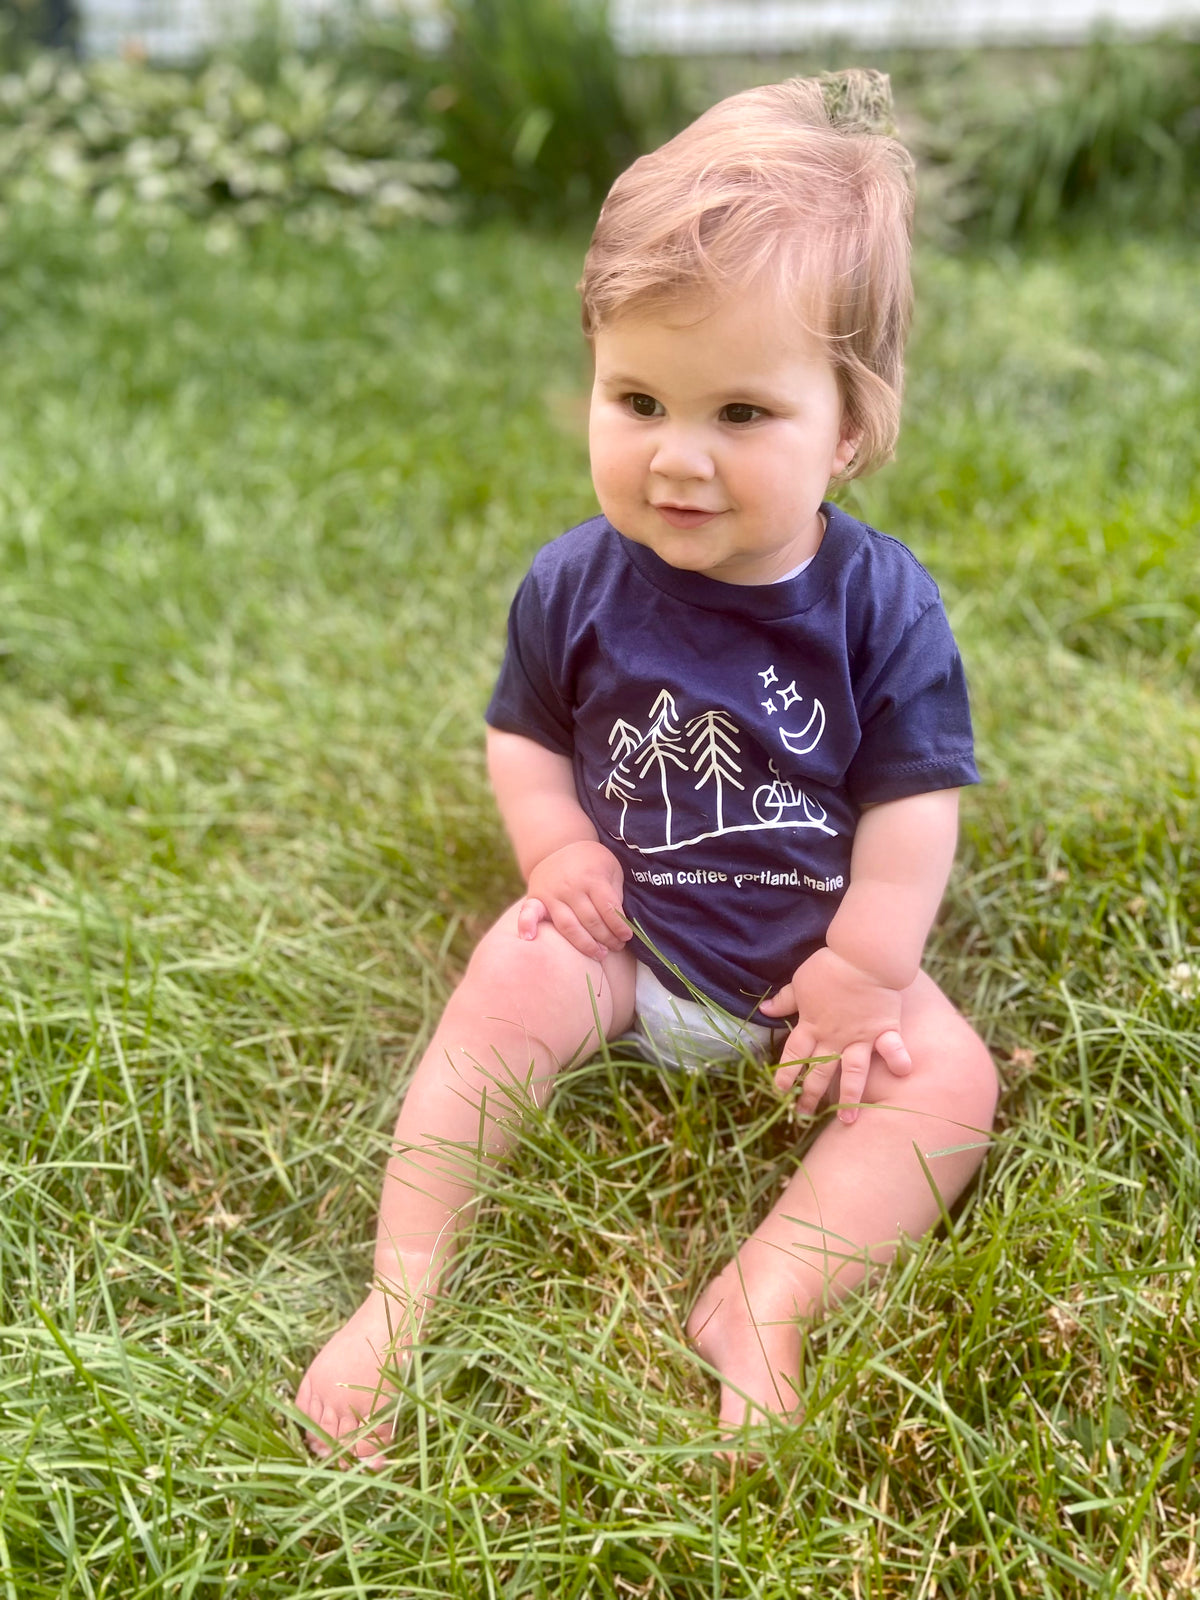 A toddler with light hair wearing a Tandem Kids Tandem Moon Tee sits on grass, looking off to the side. The shirt has a graphic of mountains and trees with text. Soft focus background with greenery.